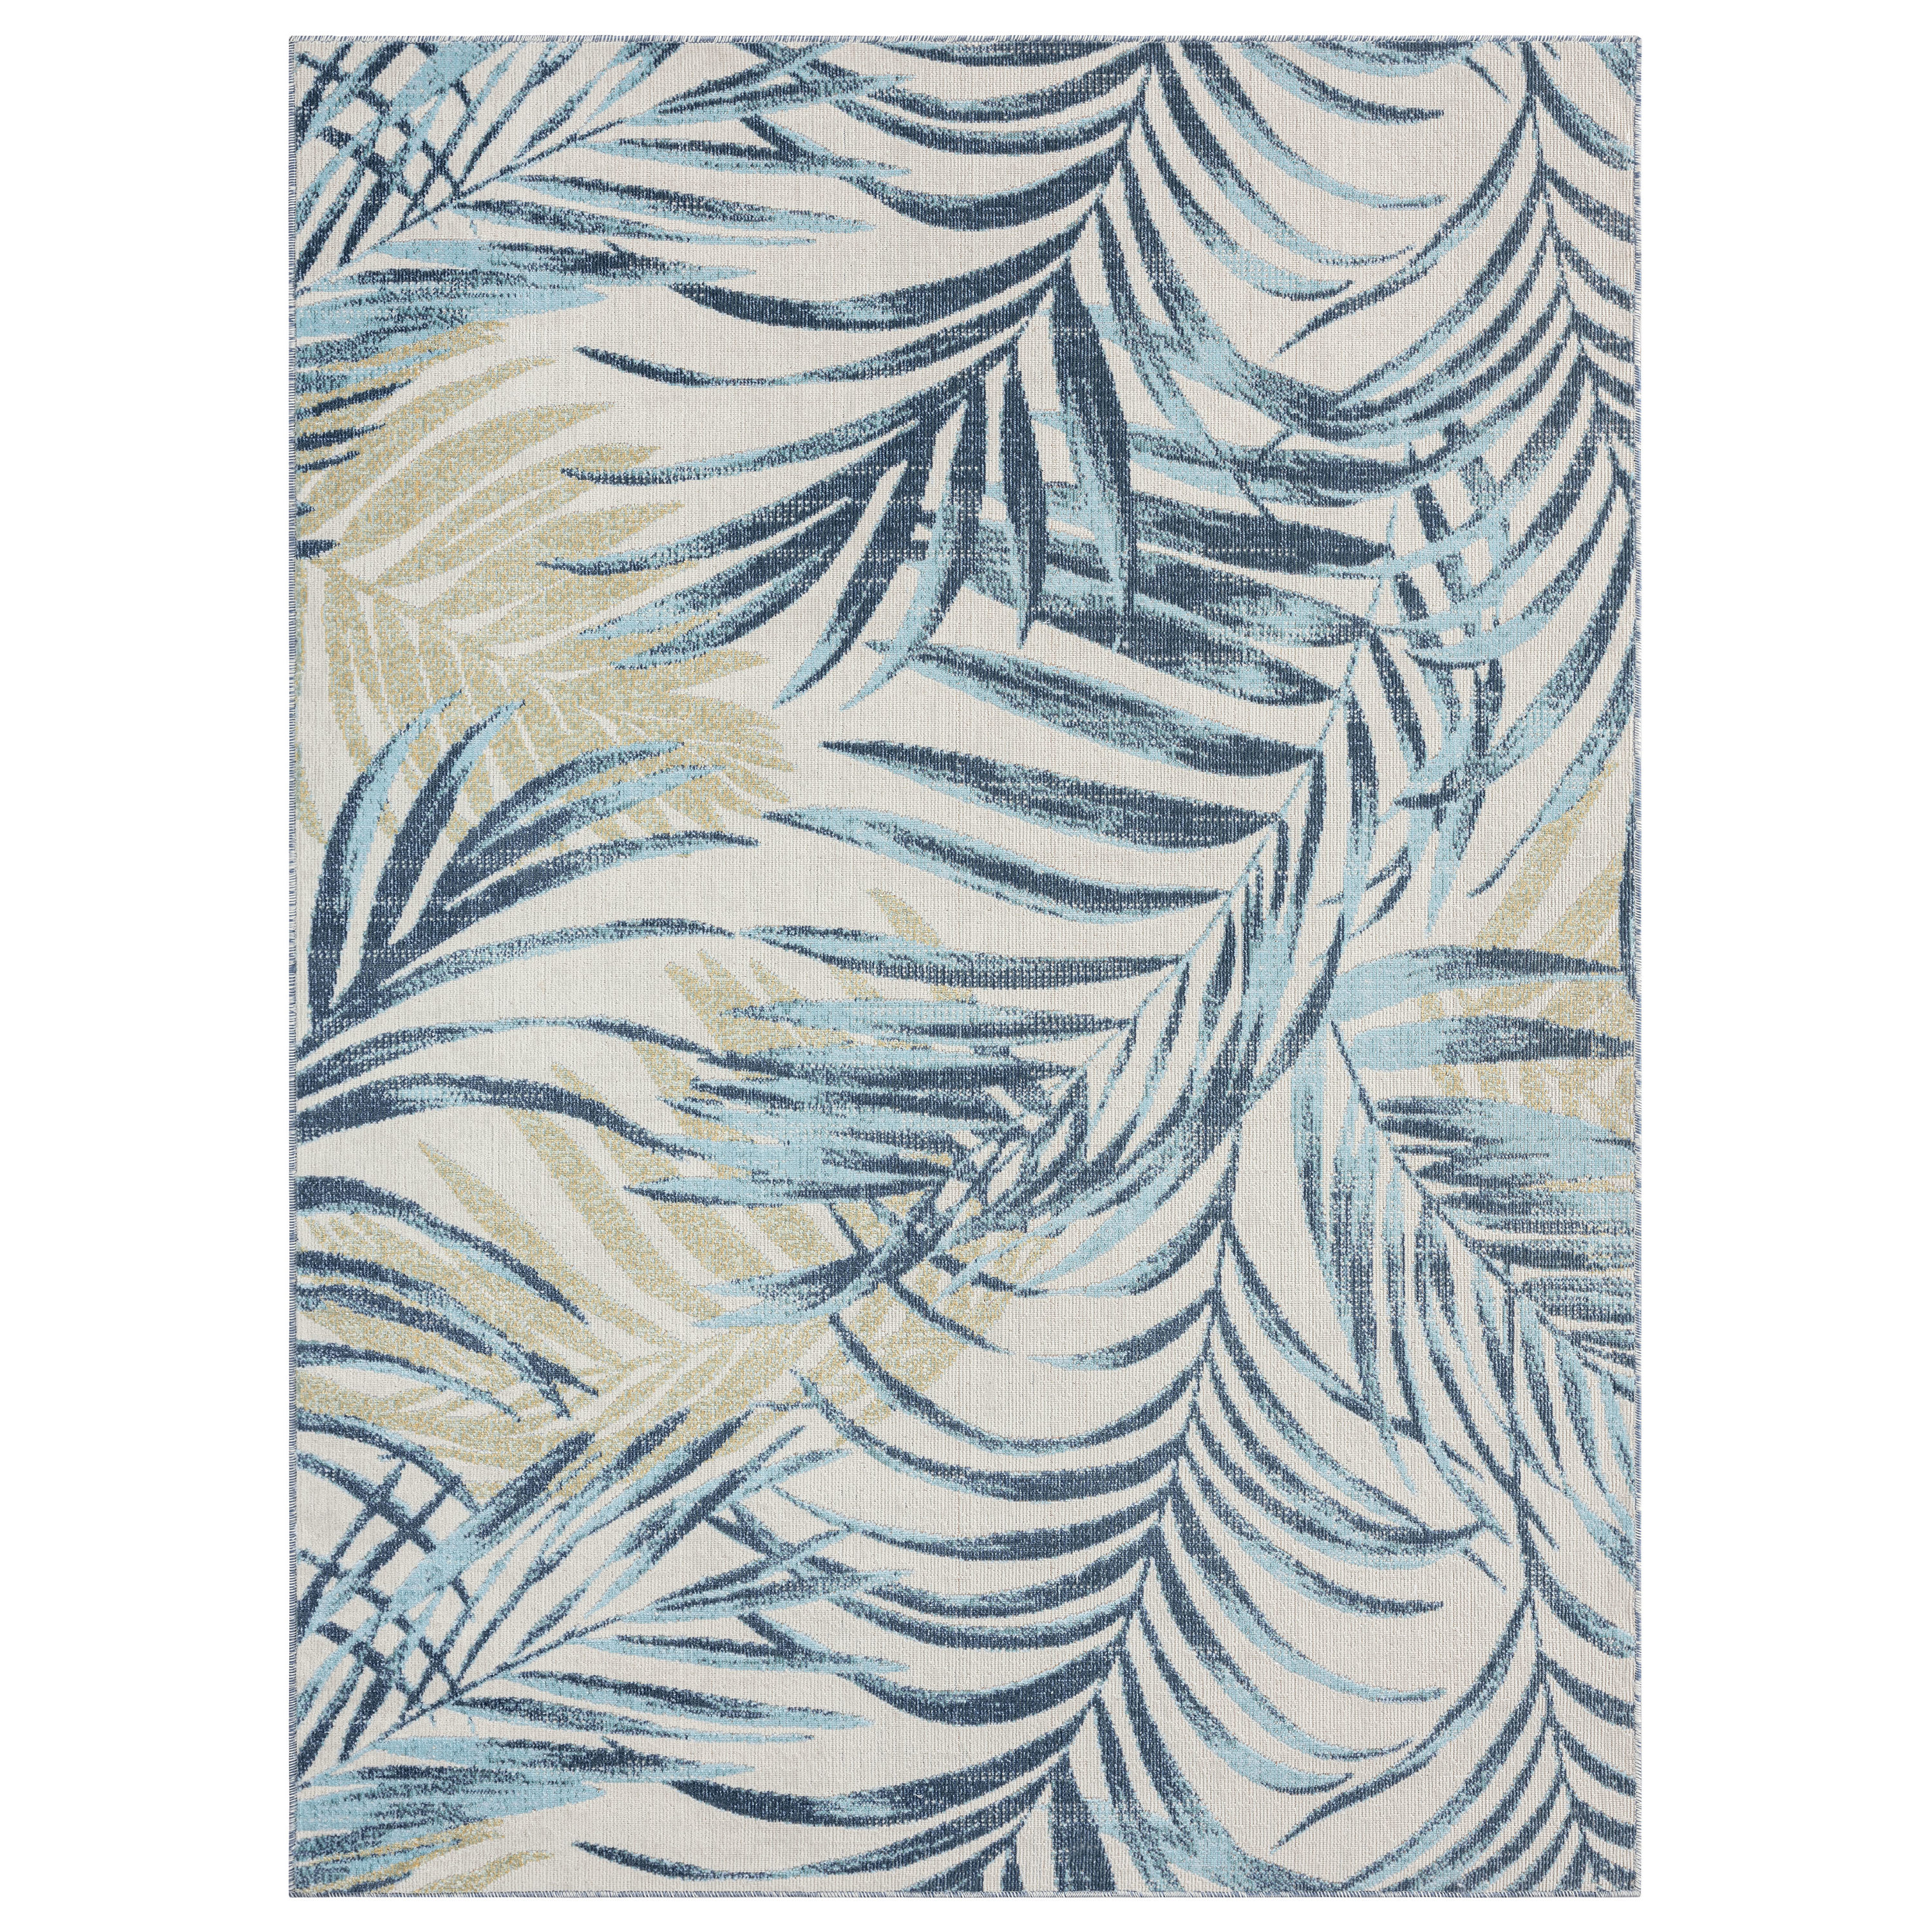 Bahama Palm Frond Floral Multi 5 ft. x 7 ft. Indoor/Outdoor Area Rug